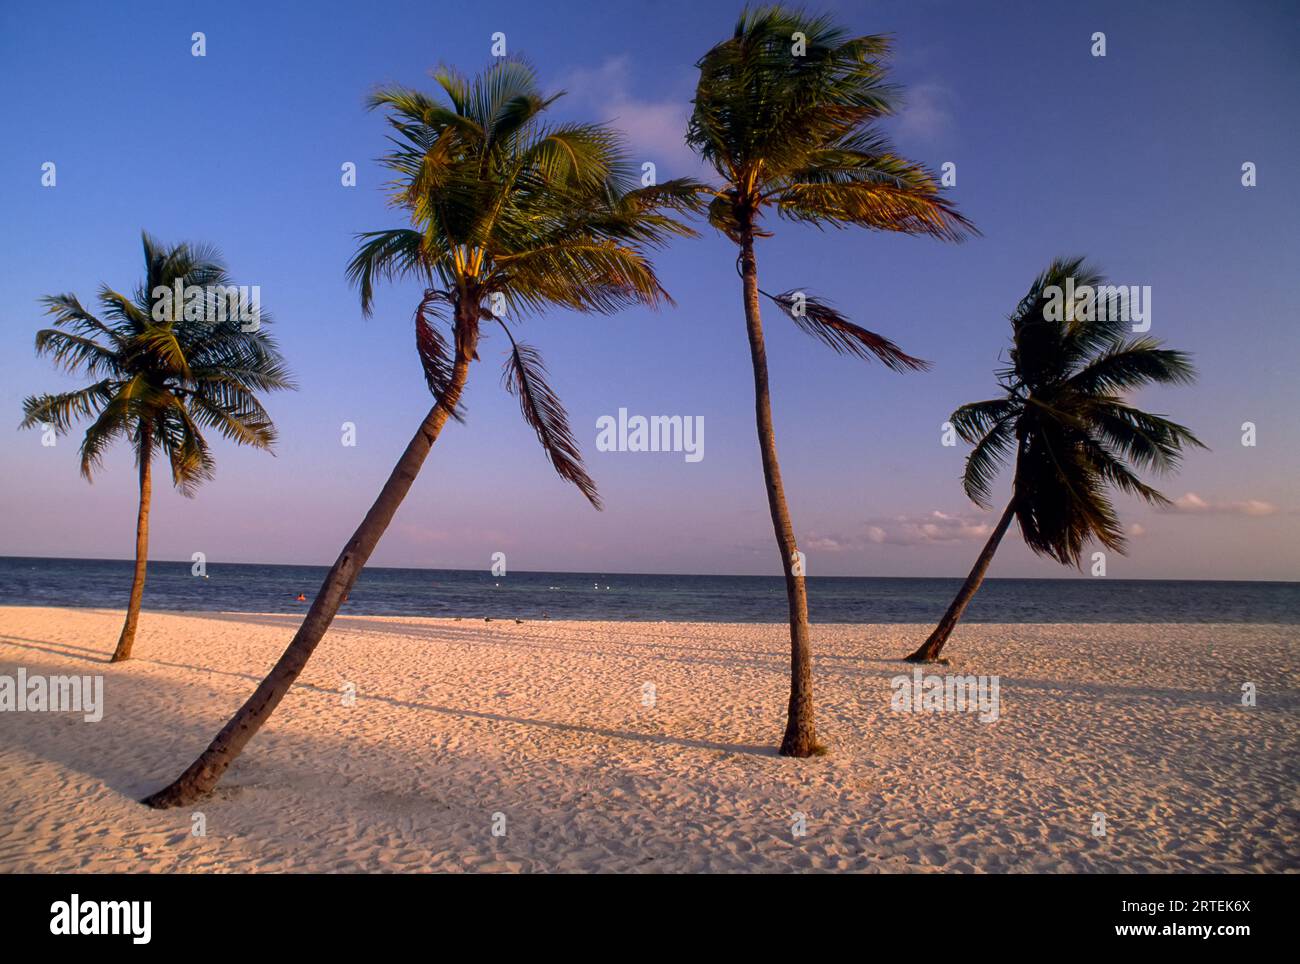 Empty beach with palm trees in Key West, Florida, USA; Key West, Florida, United States of America Stock Photo